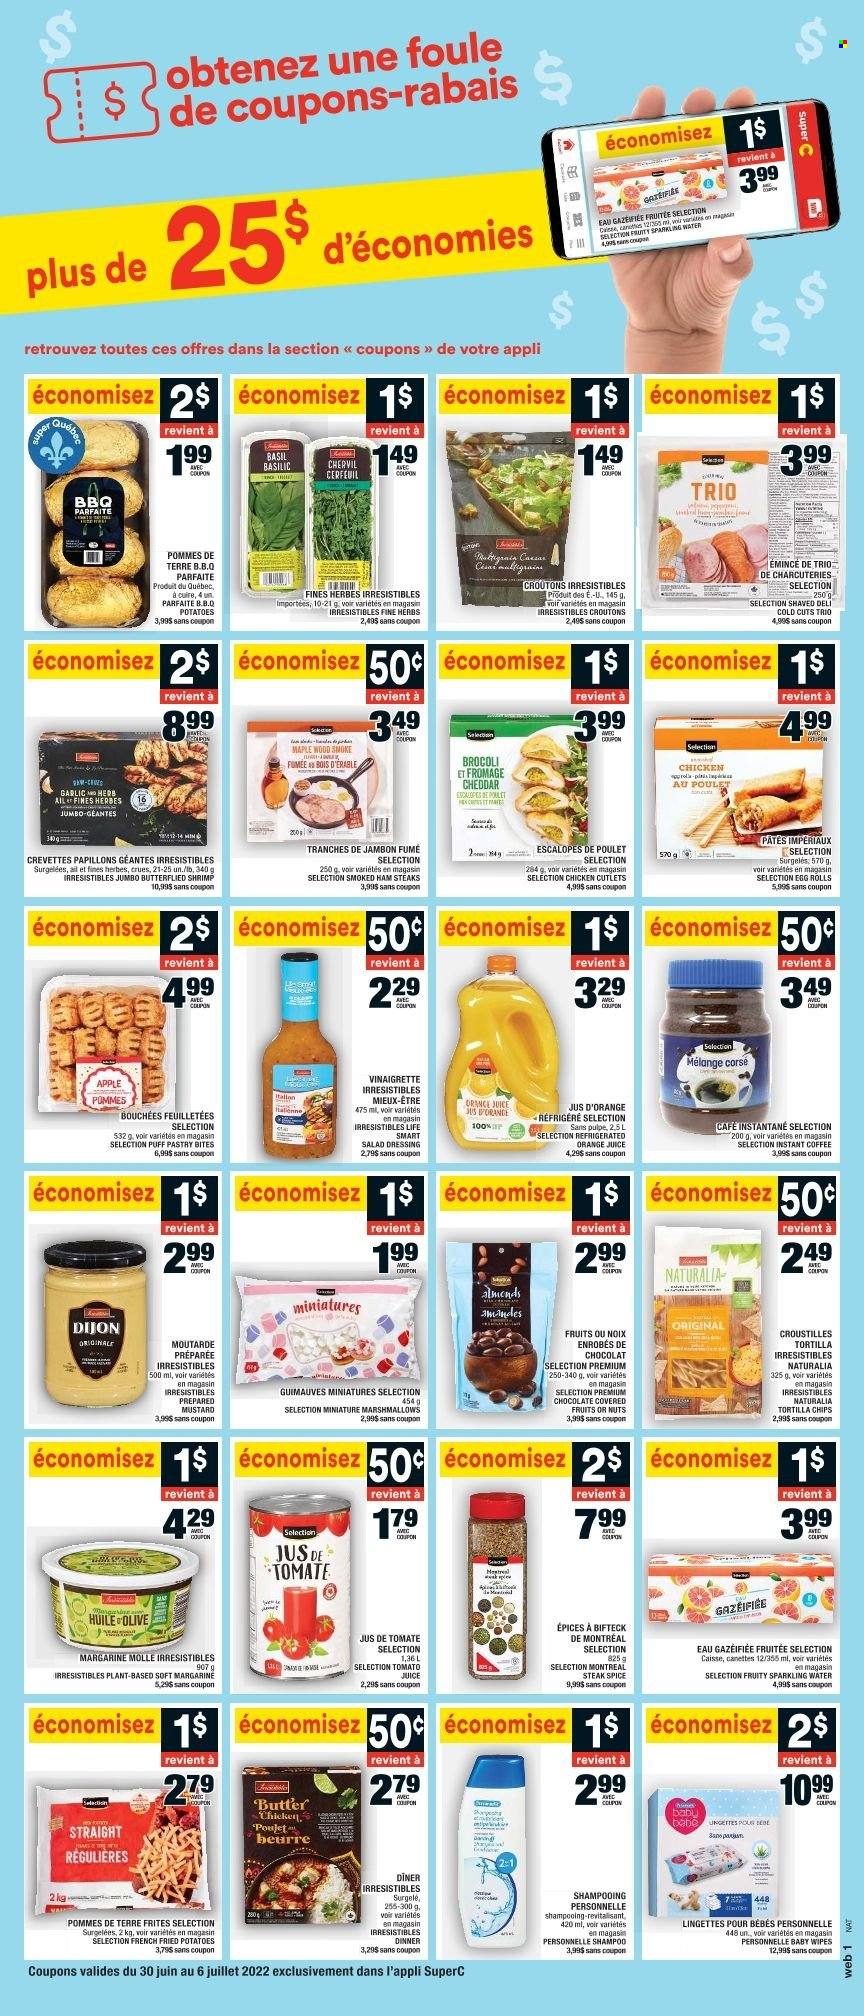 thumbnail - Super C Flyer - June 30, 2022 - July 06, 2022 - Sales products - garlic, potatoes, shrimps, egg rolls, ham, smoked ham, ham steaks, margarine, puff pastry, marshmallows, tortilla chips, chips, croutons, spice, herbs, mustard, salad dressing, vinaigrette dressing, dressing, almonds, tomato juice, orange juice, juice, sparkling water, instant coffee, chicken breasts, chicken cutlets, chicken, wipes, baby wipes, shampoo, steak. Page 11.